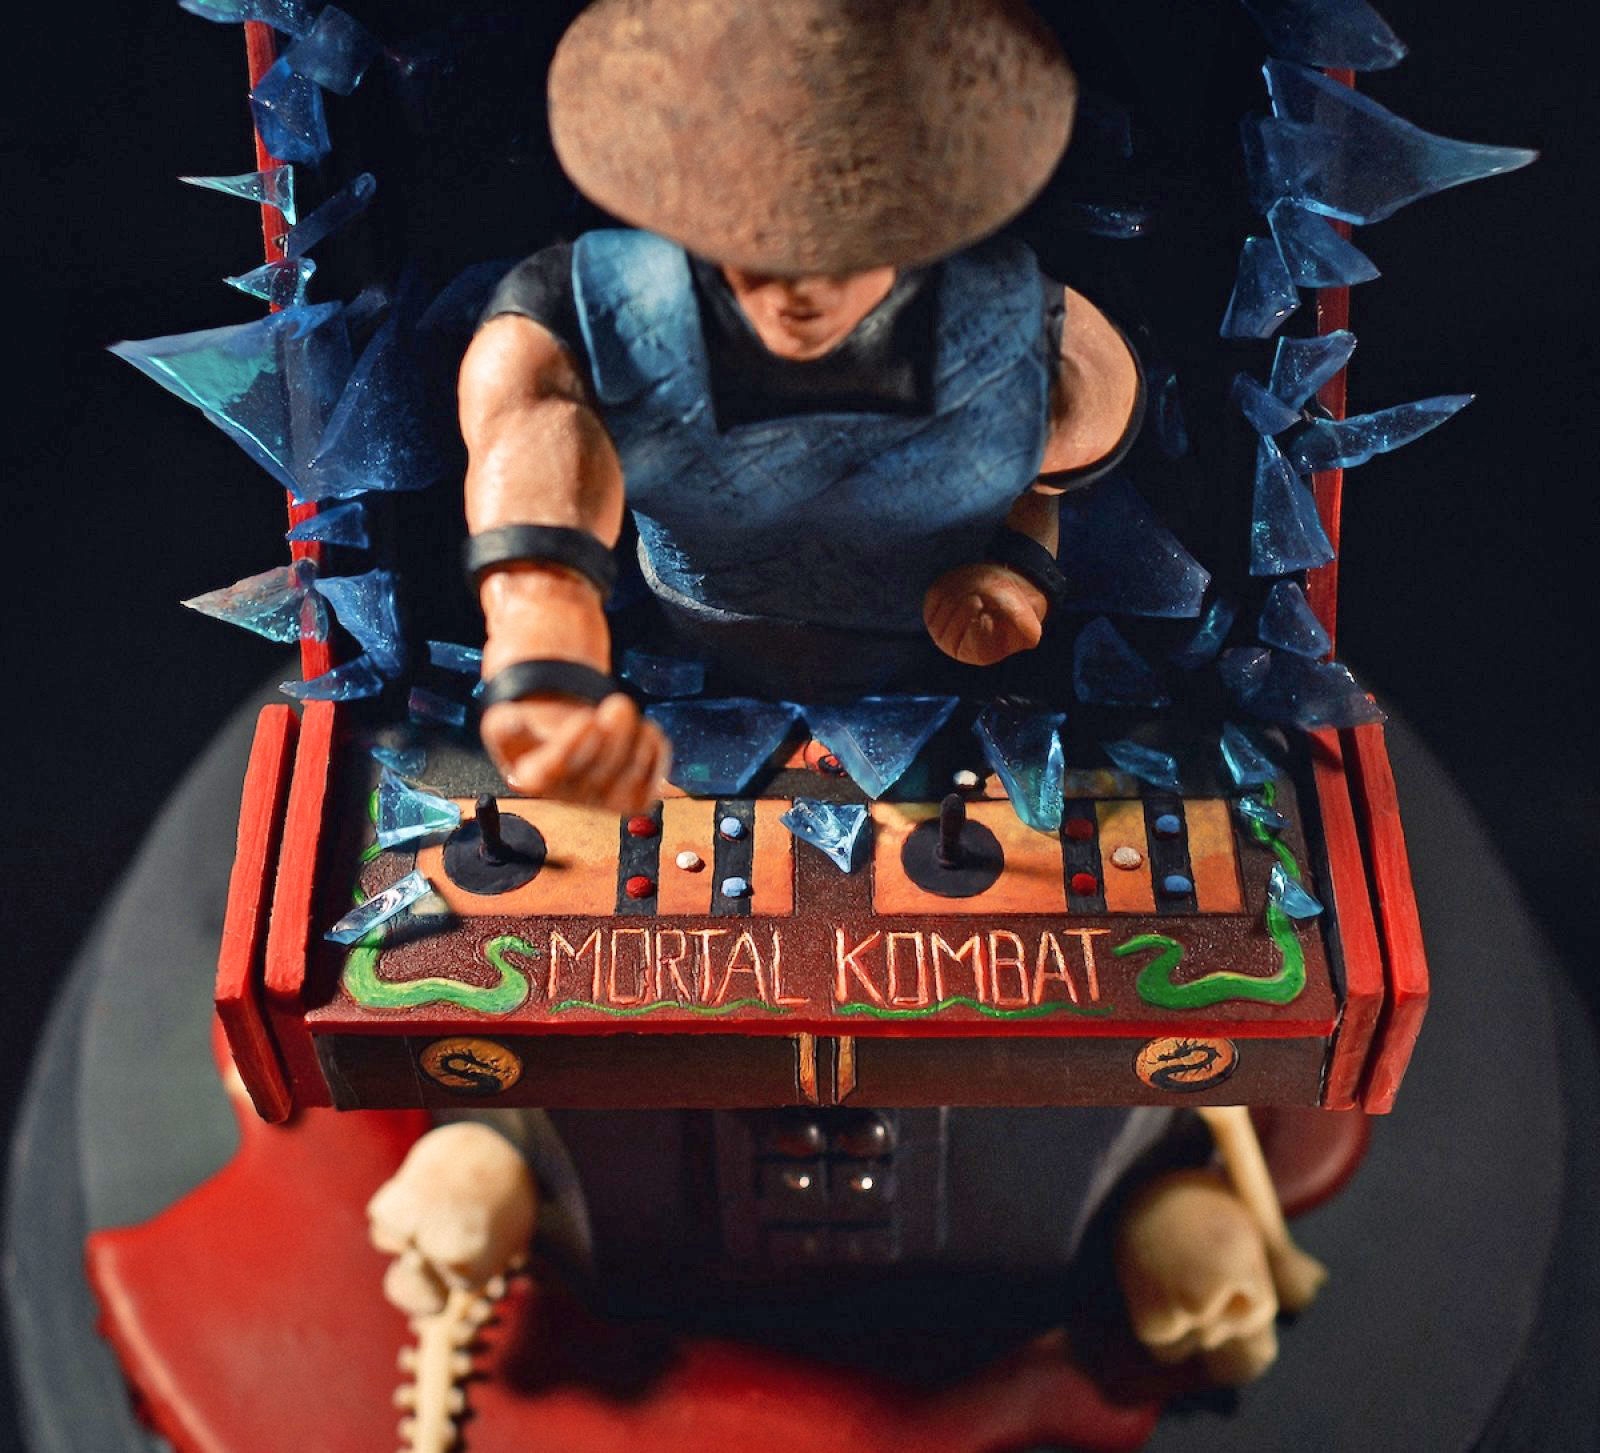 The unfiltered joy of Christine McConnell's 'Mortal Kombat' cake | DeviceDaily.com